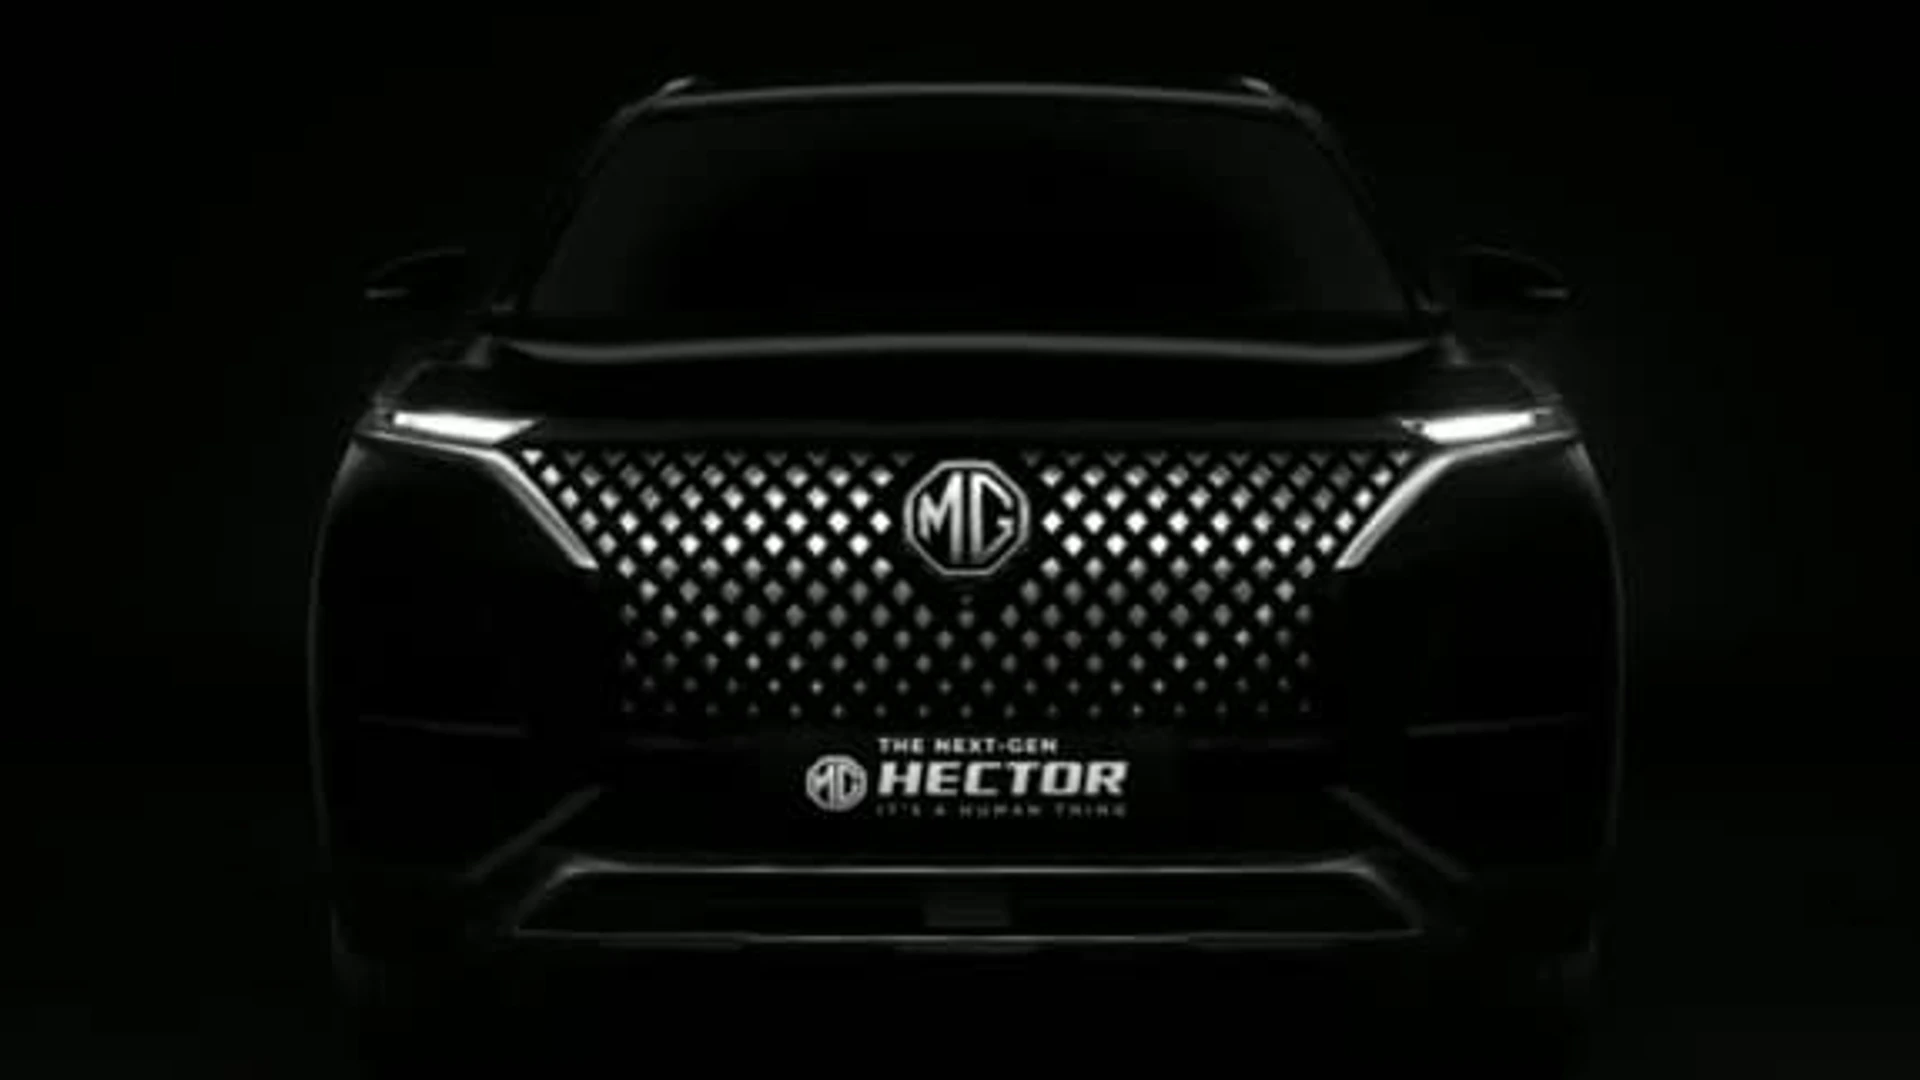 MG Hector Facelift Interior Teased